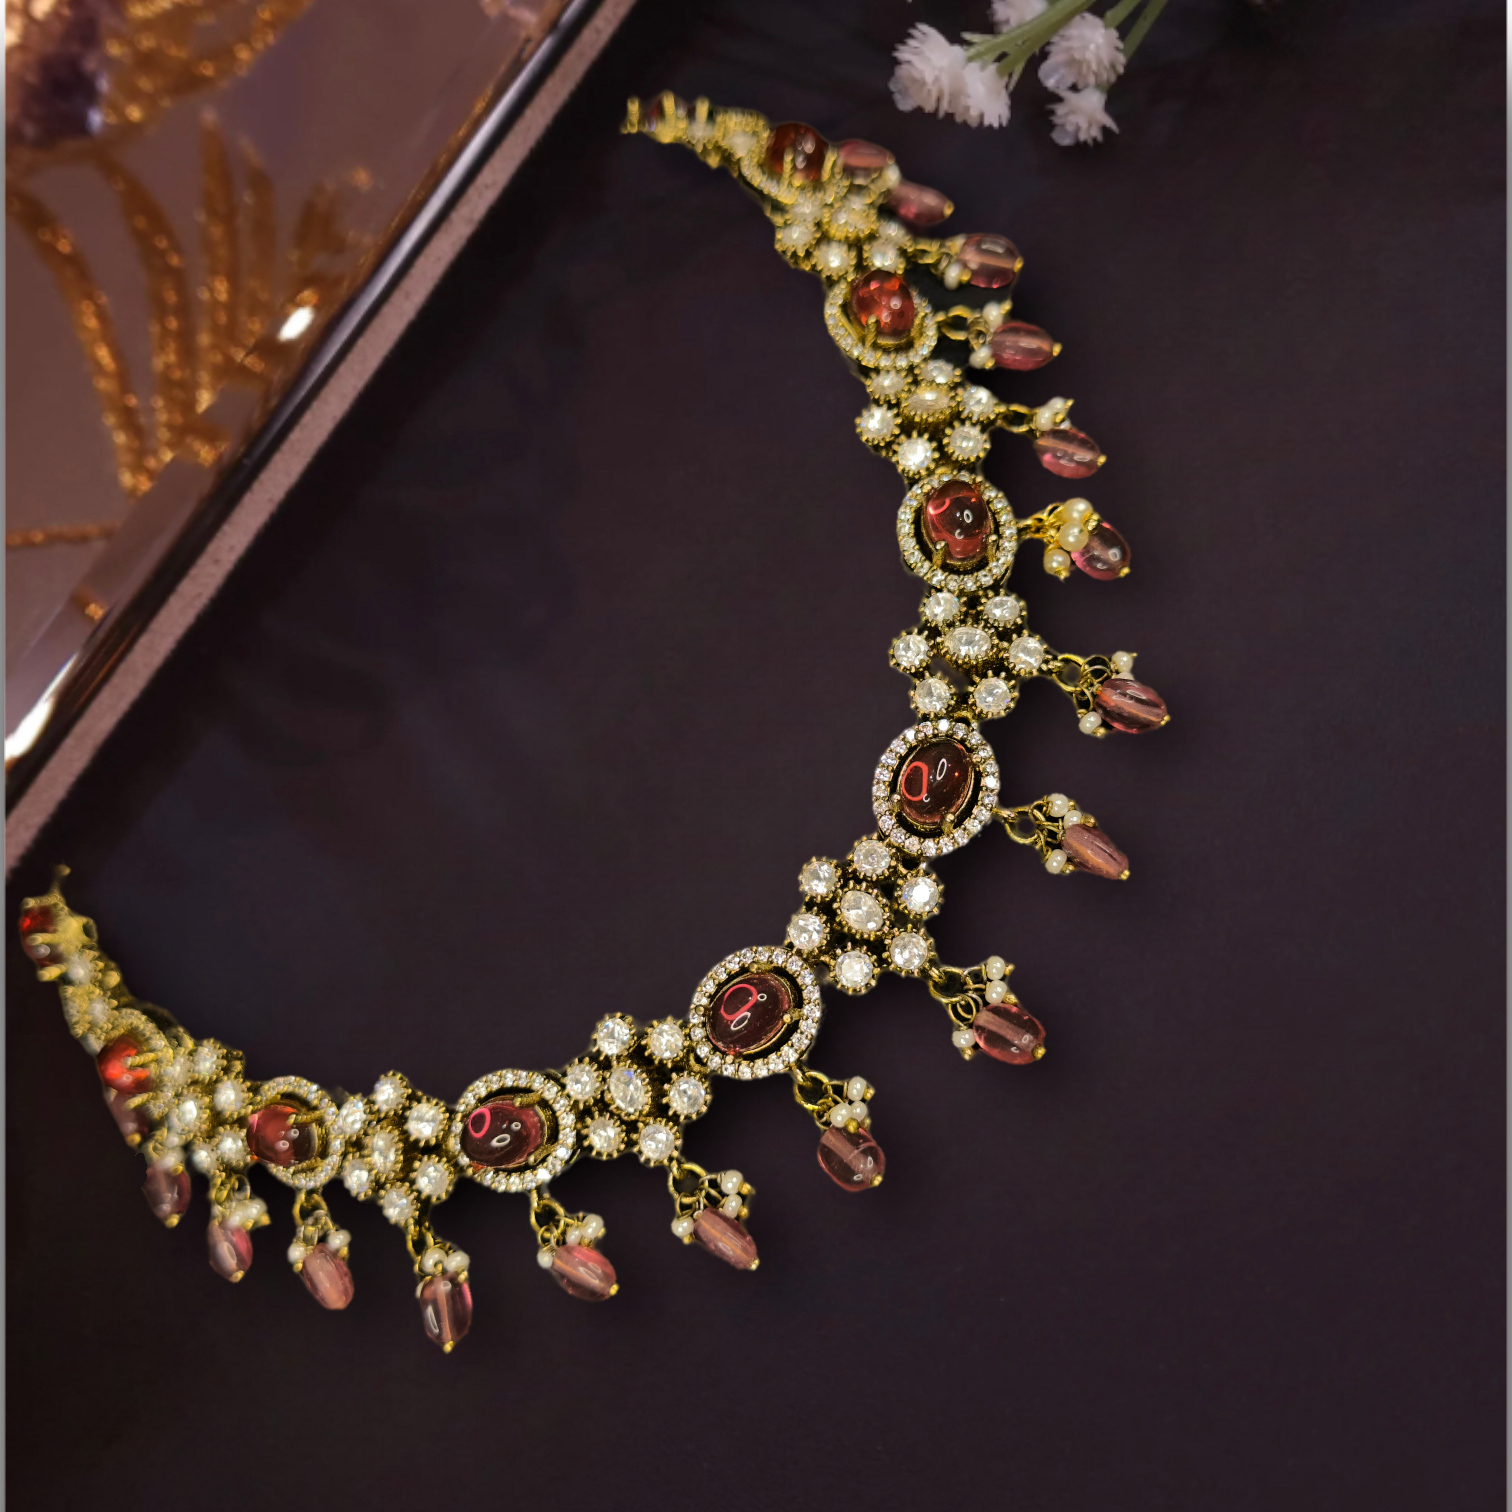 Beautiful Victorian Necklace Set with zircon,moissanite polki stones,pearls, and beads. This Victorian Jewellery is available in Red & Green colour variants. 